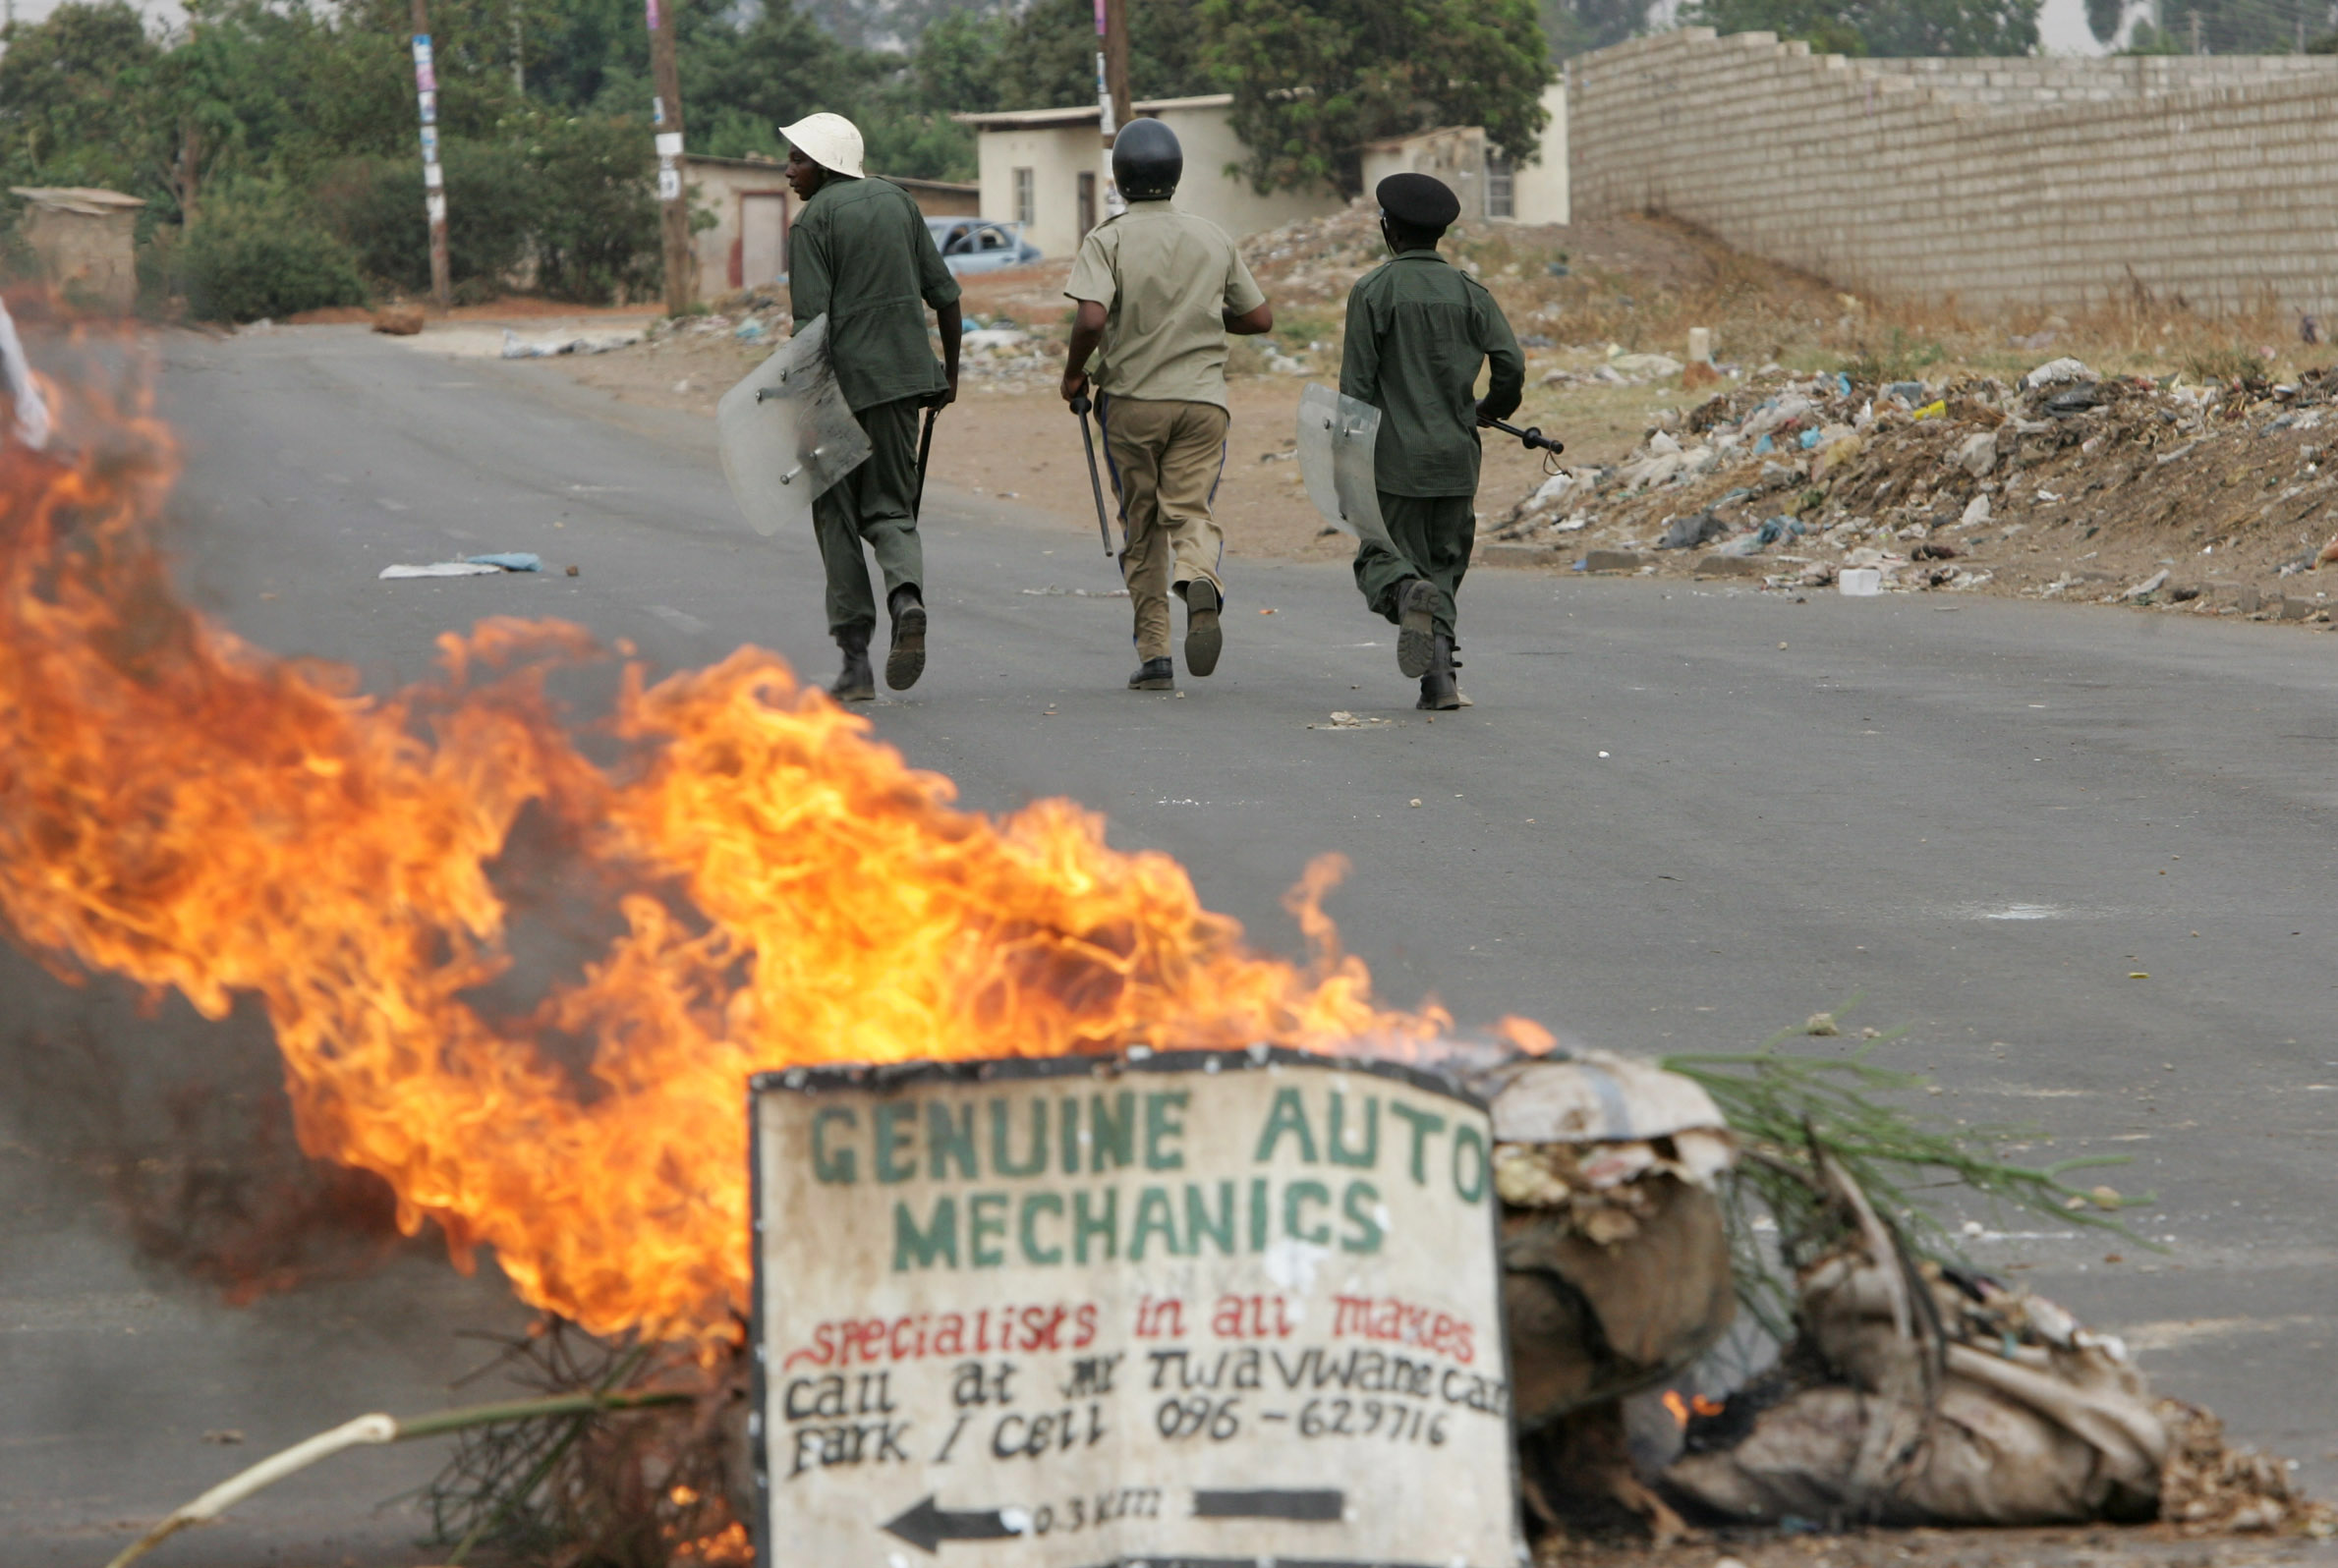 Three policemen sprinting past a burning barricade during a protests in Zambia